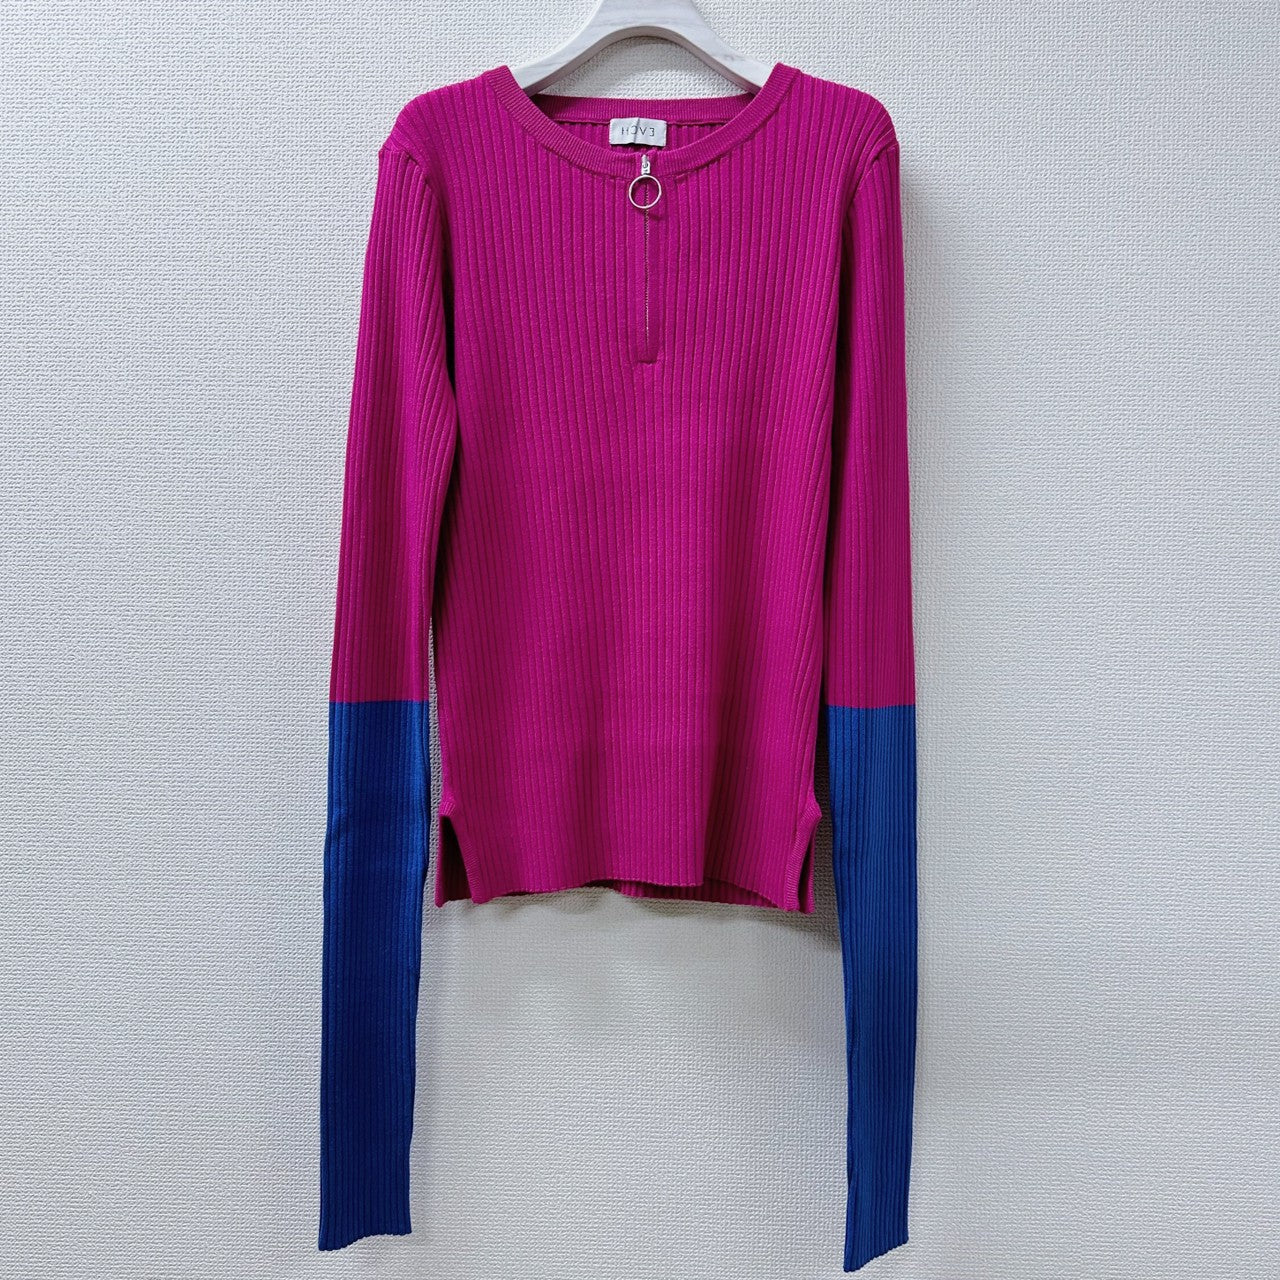 BICOLOR SLEEVE KNIT TOP